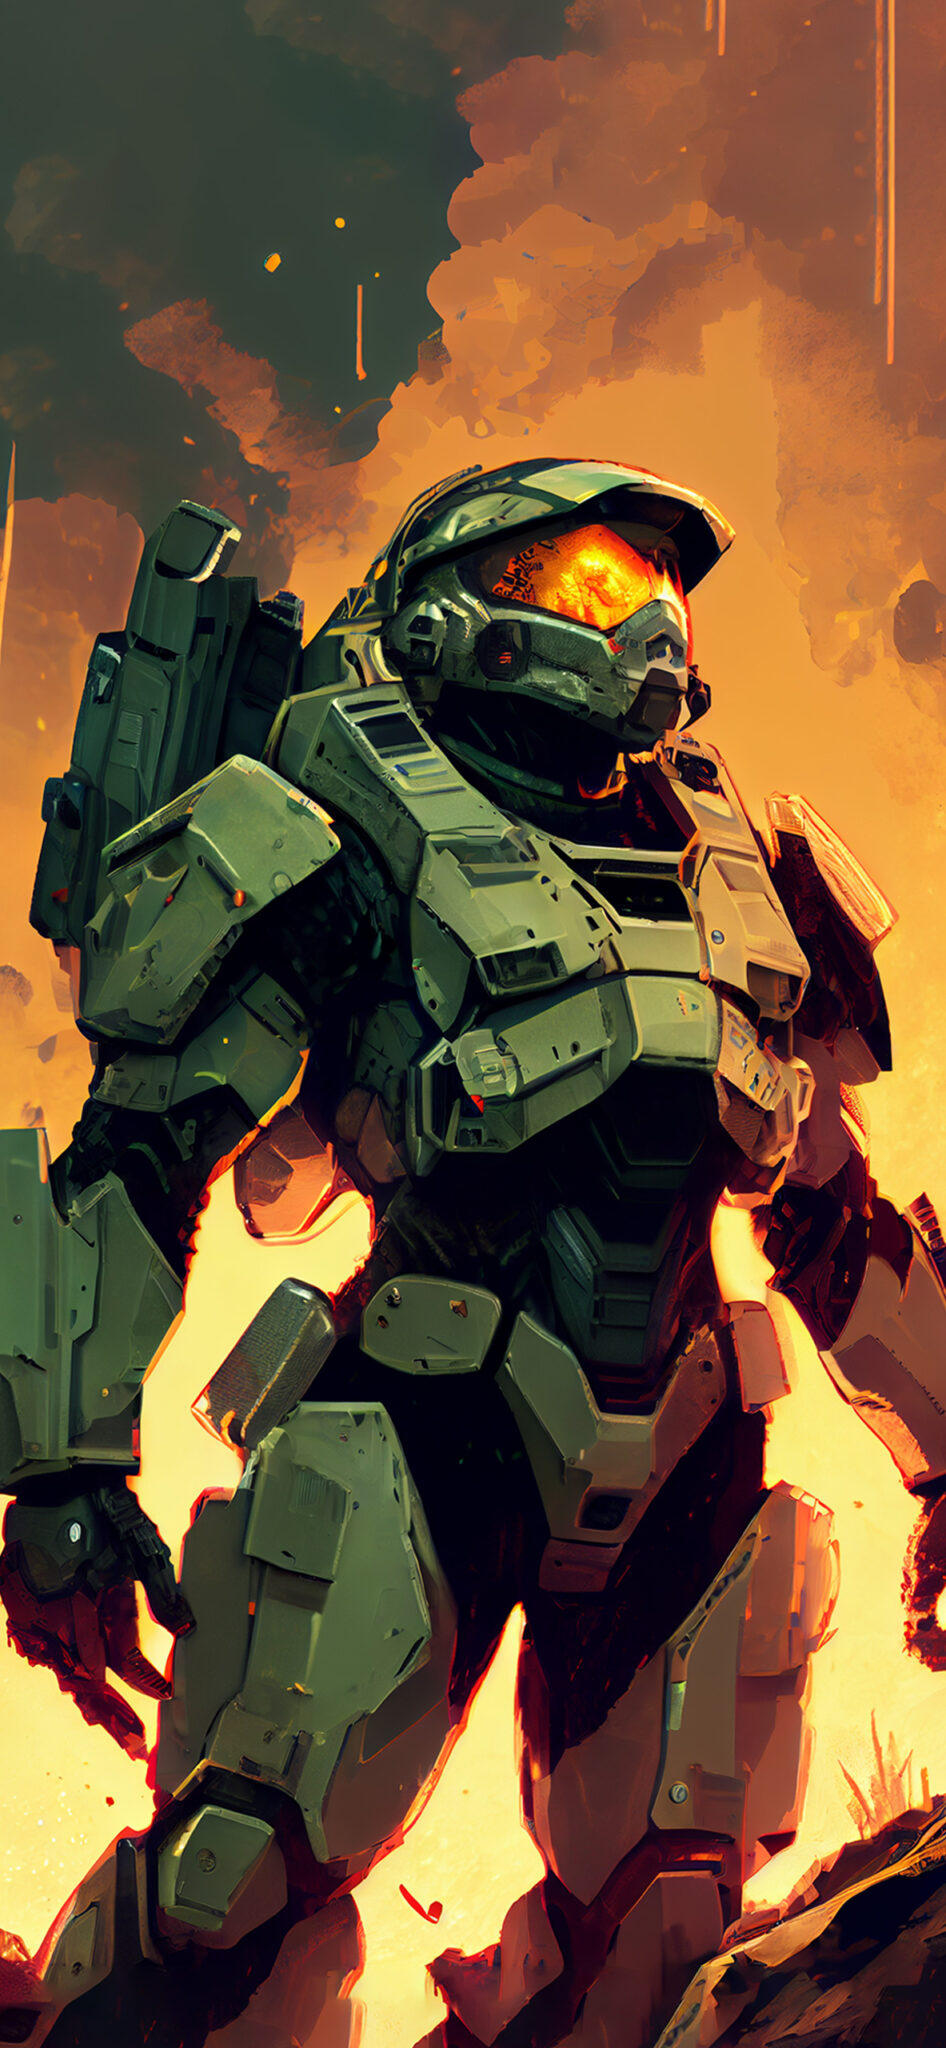 Halo Master Chief Art Wallpapers - Cool Halo Wallpaper for iPhone